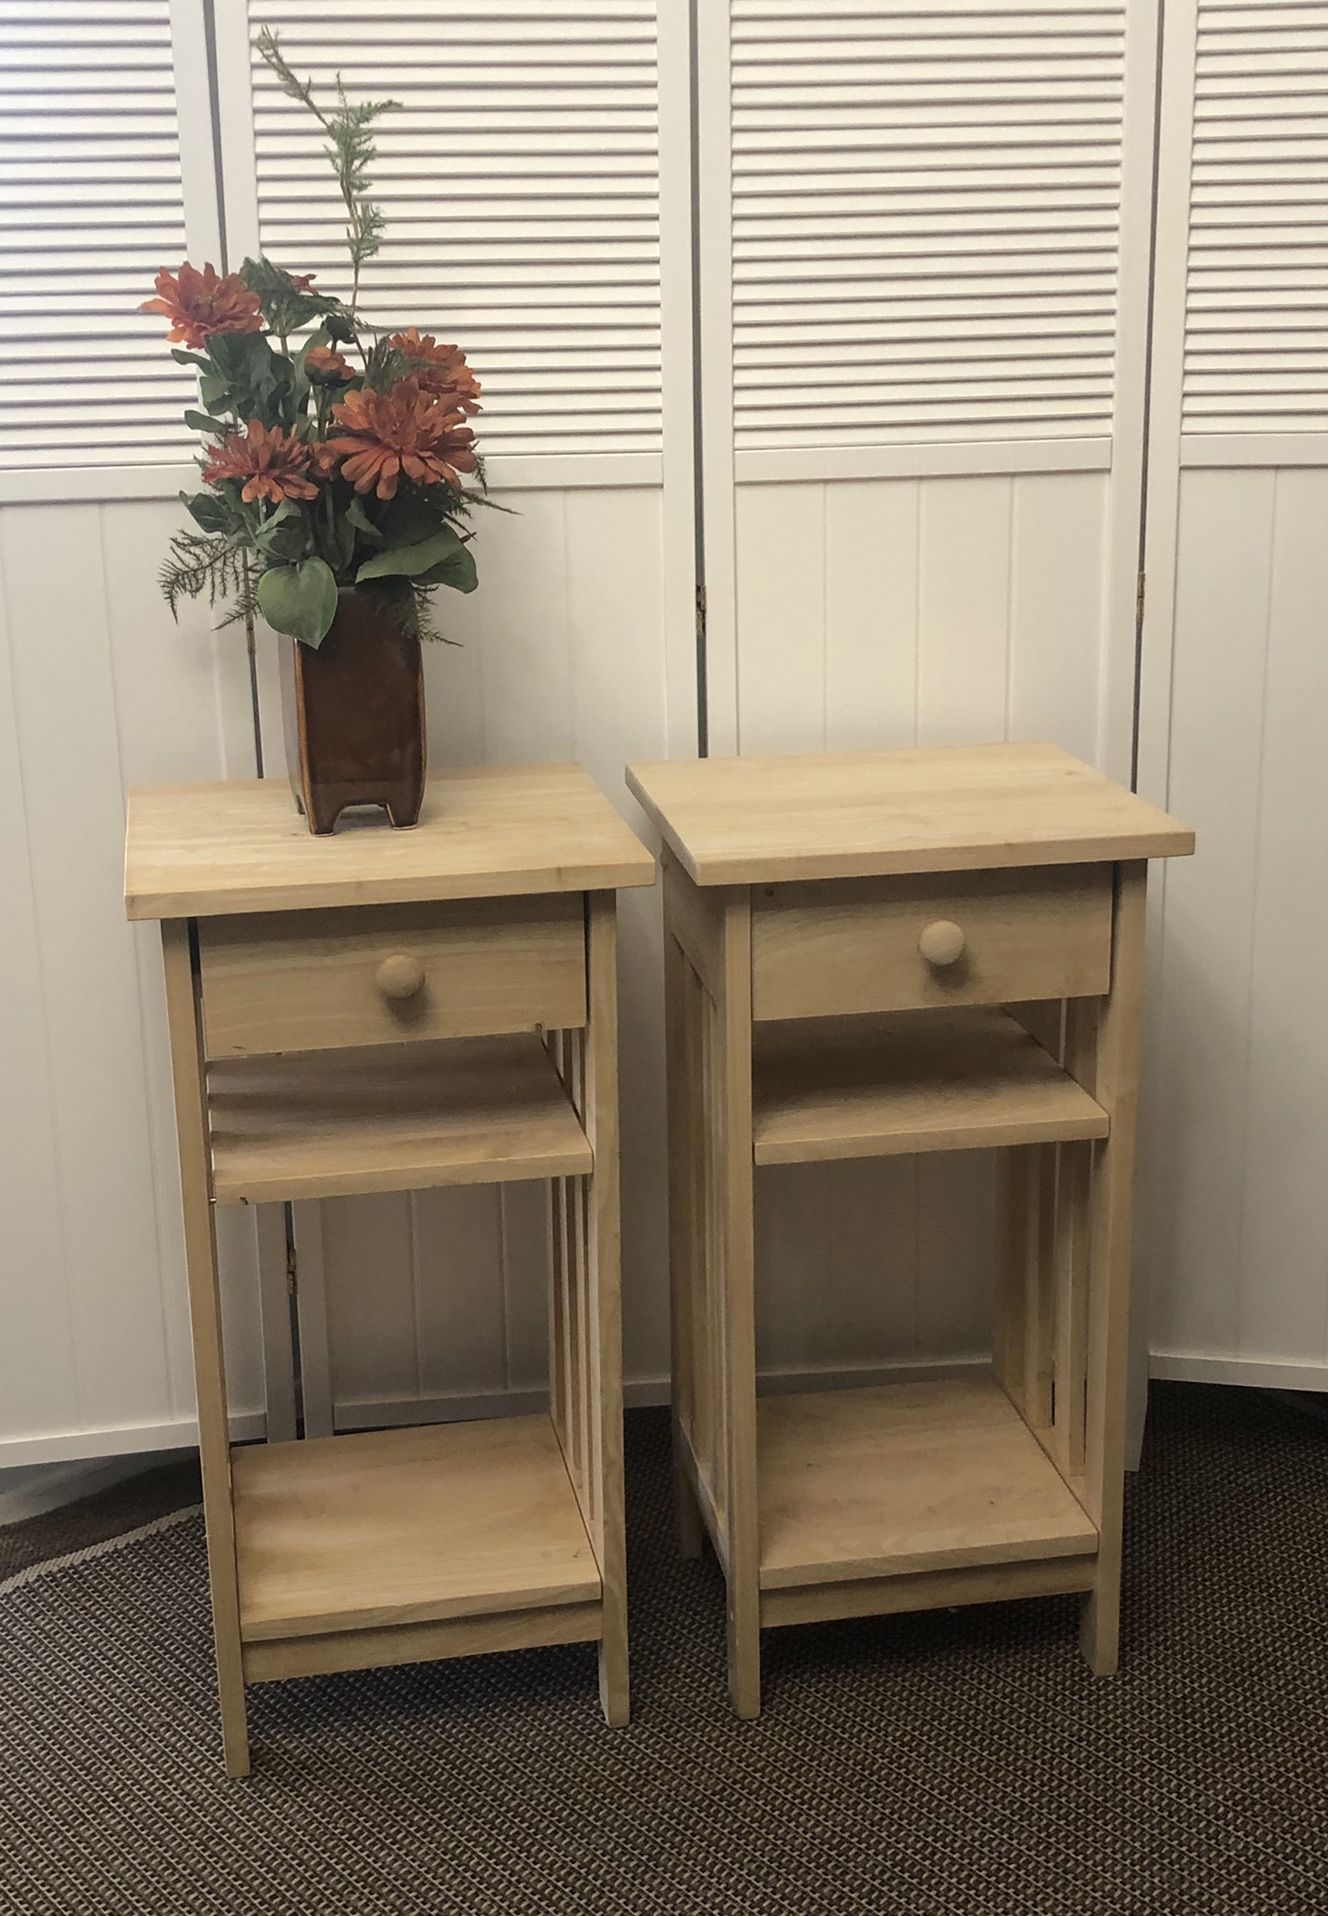 End Tables, Nightstands, Cabinets, Side Tables